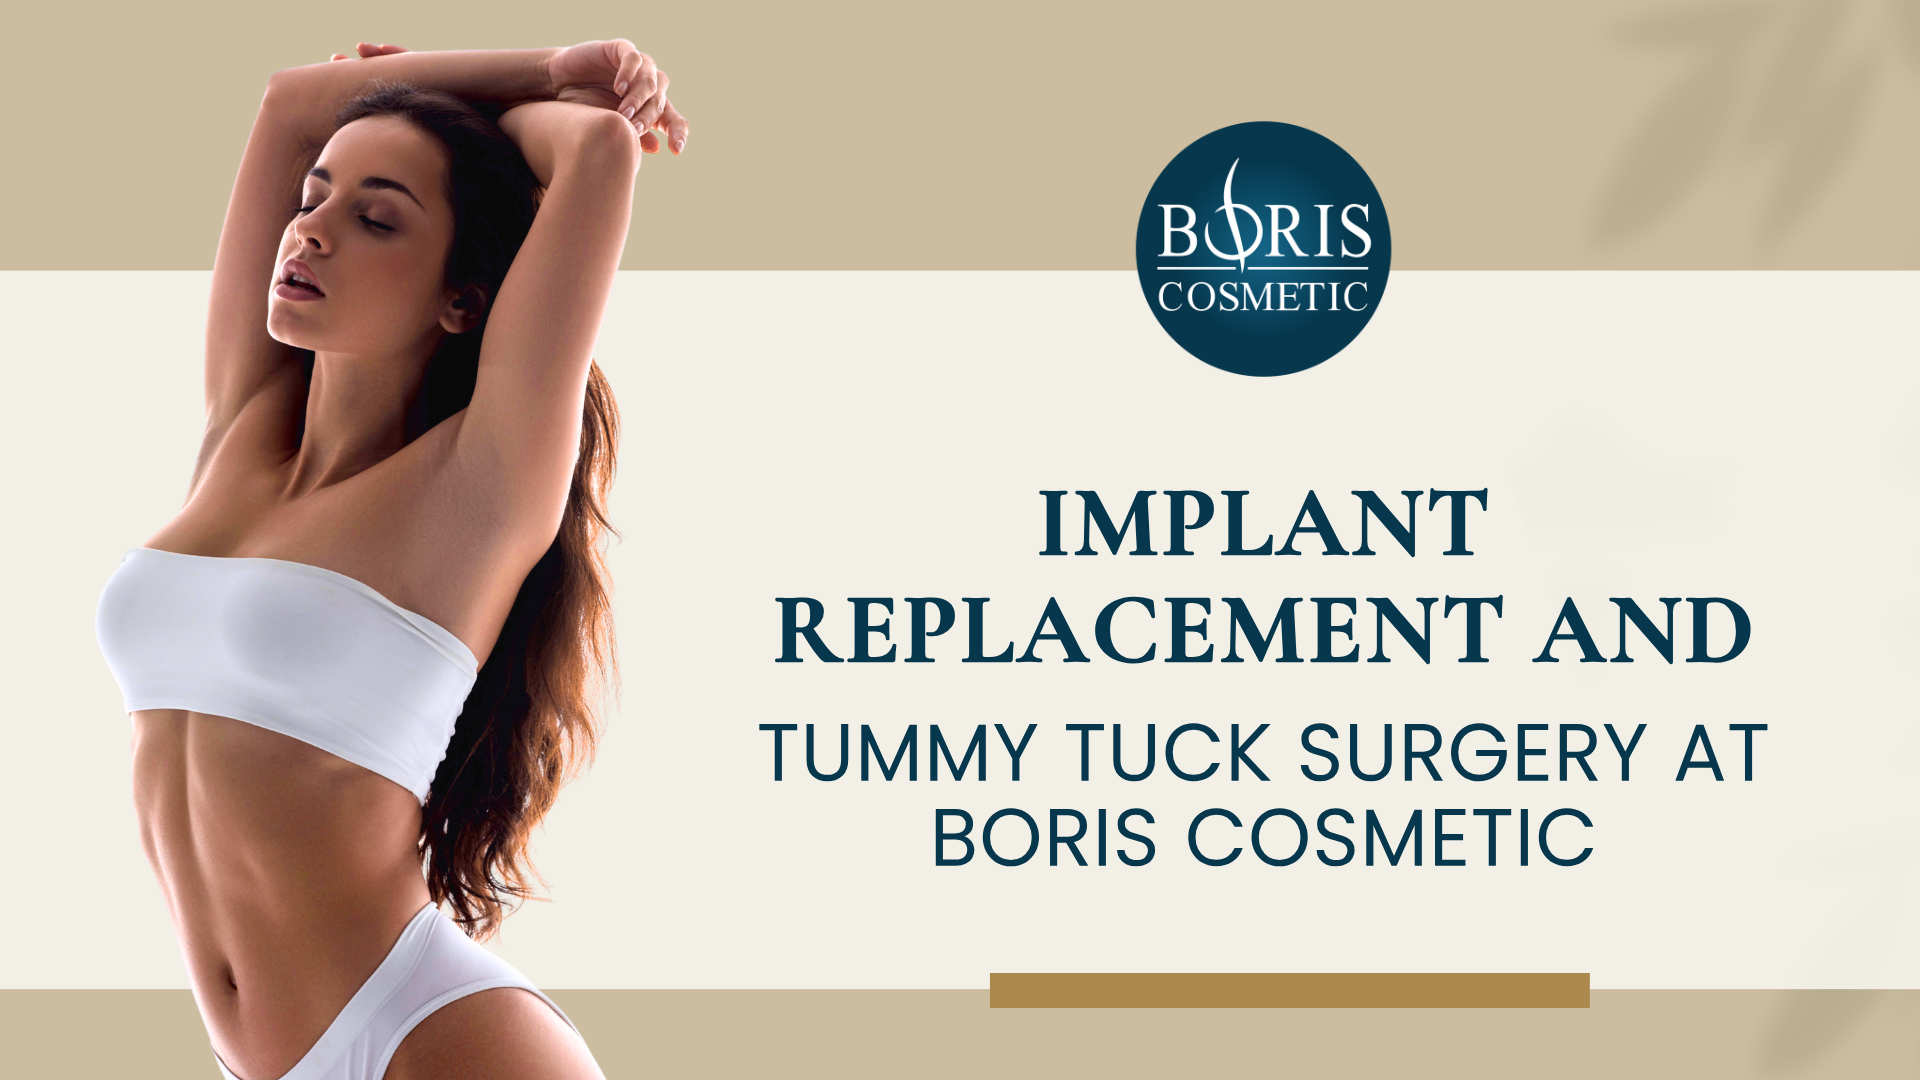 Implant Replacement and Tummy Tuck Done at Boris Cosmetic in Los Angeles